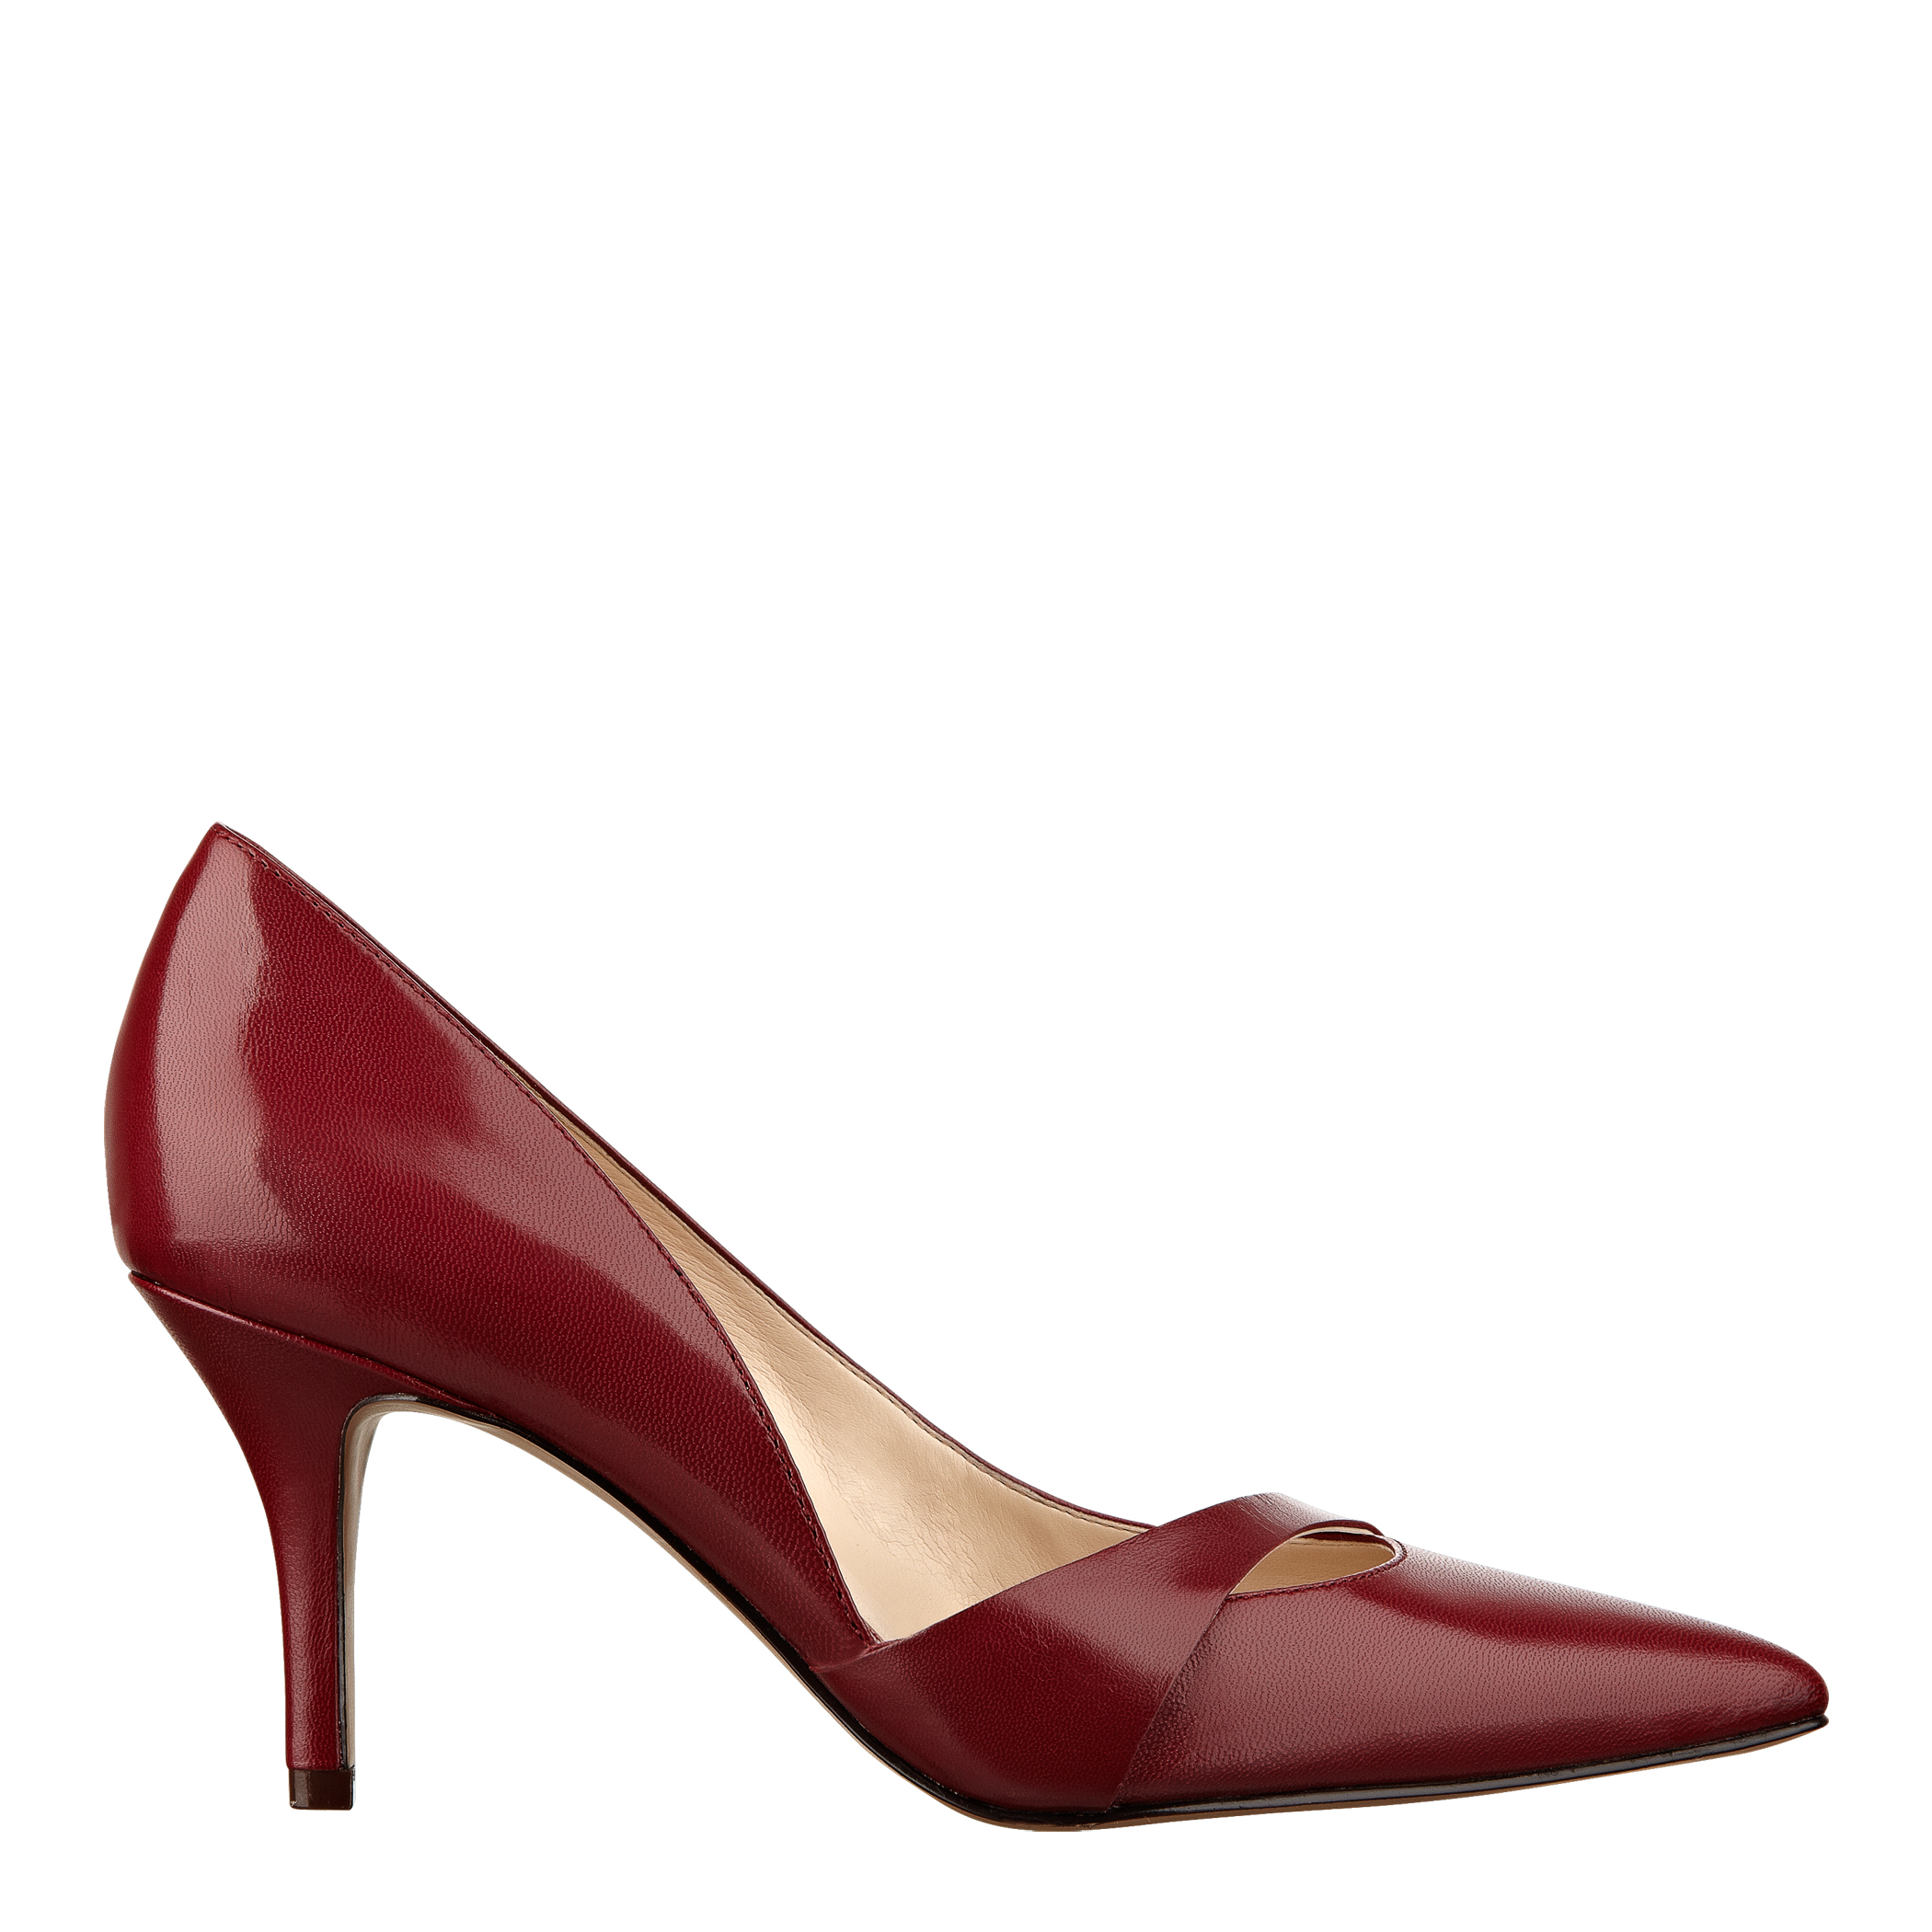 Nine West Kimery Mid Heel Pointy Toe Pumps in Red (RED LEATHER)